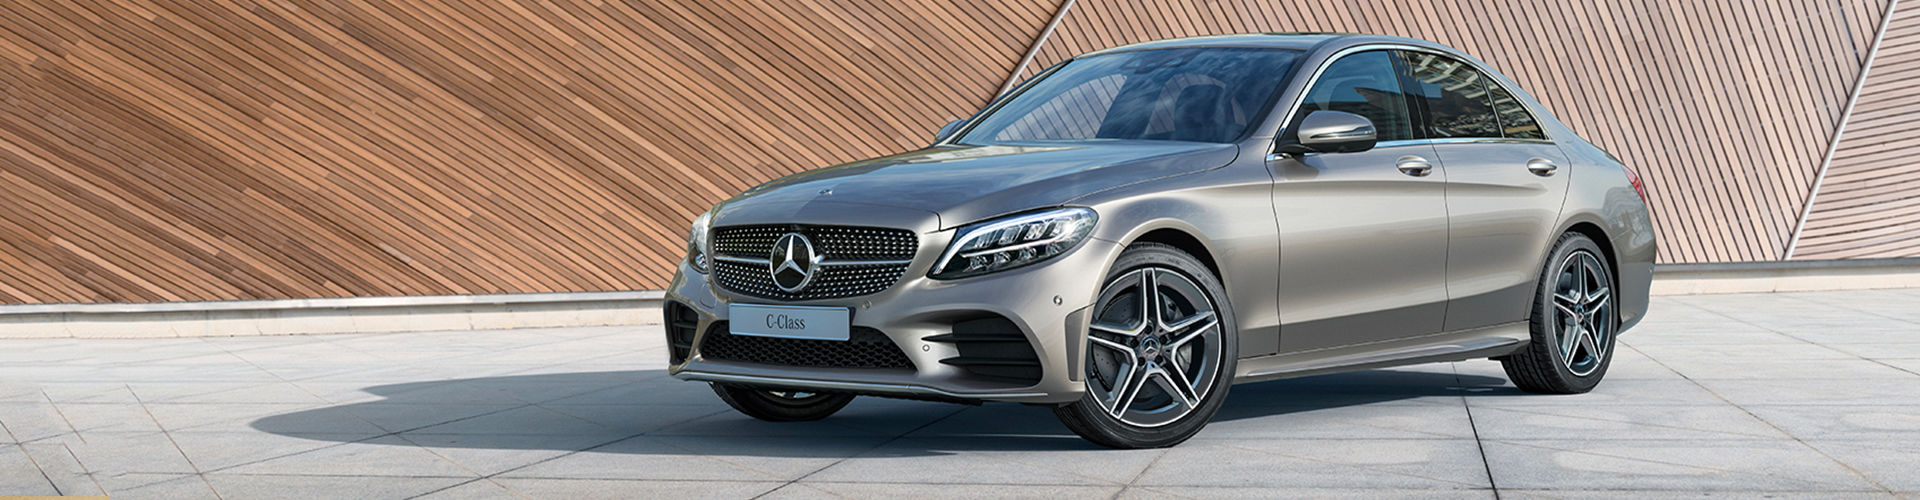 C-Class, boldness is in the eye of the beholder.